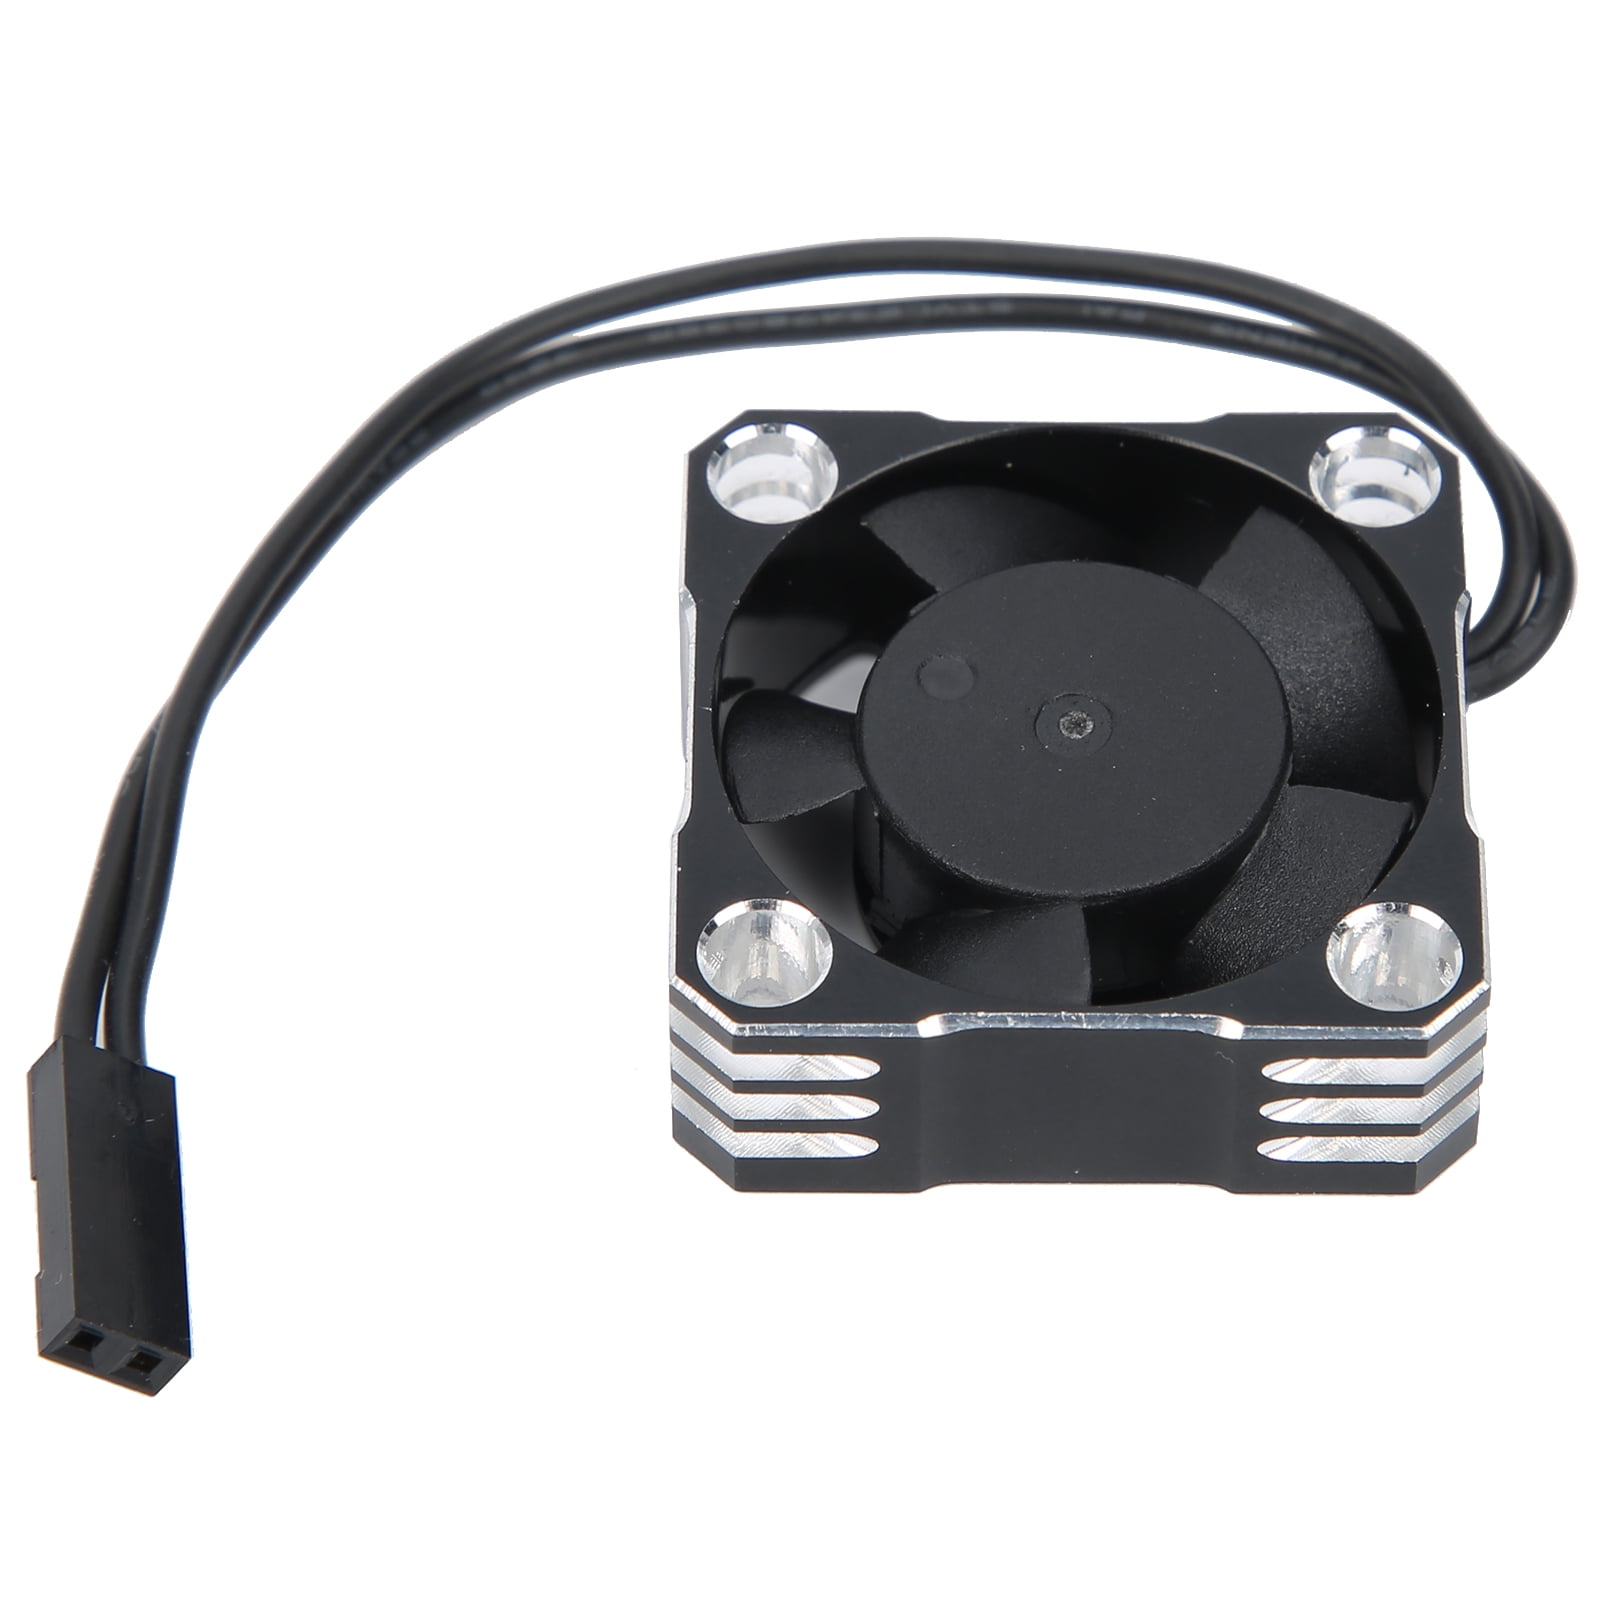 Rc Cooling Fan Small Size Heat Dissipation Easy to Install and Stable Esc Cooling Fan for 1/10 and 1/8 for Rc Esc Motor